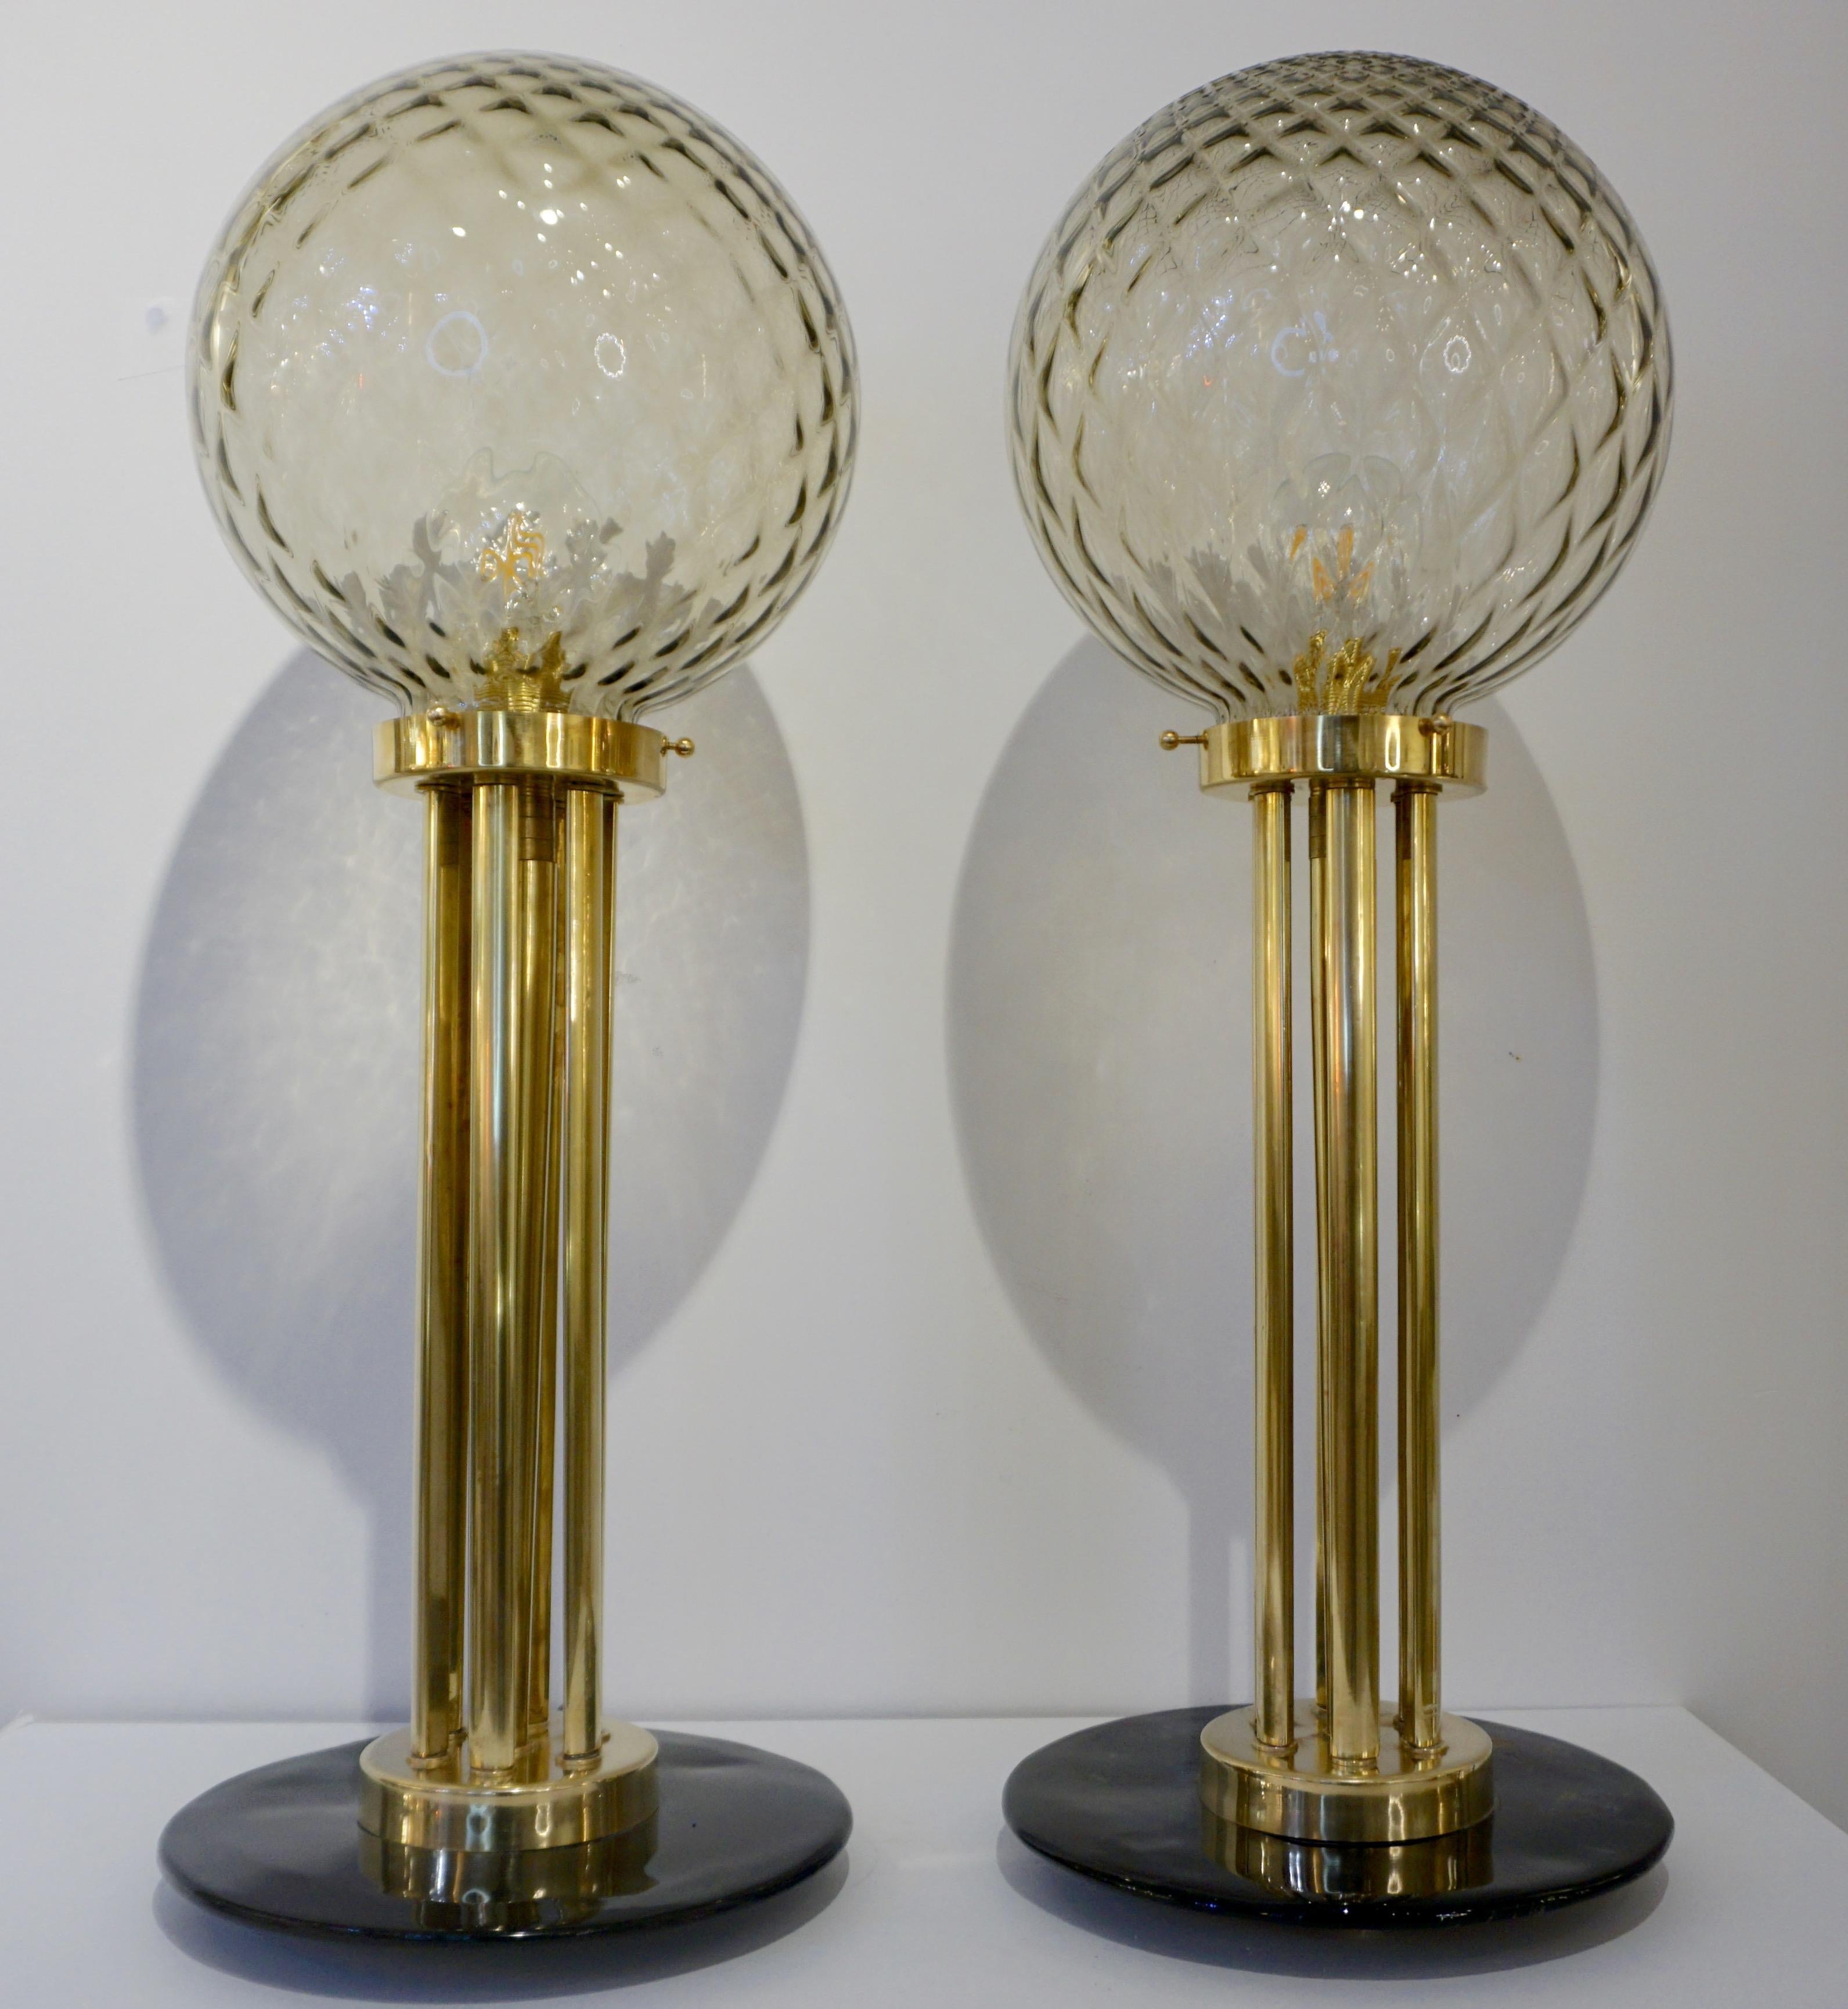 A one-of-a-kind Venetian modern design pair of table lamps, entirely handcrafted in Italy with Art Deco style, circa 2010. The honeycomb blown Murano glass globes in gold amber color are supported by an organic column pedestal composed of 7 round